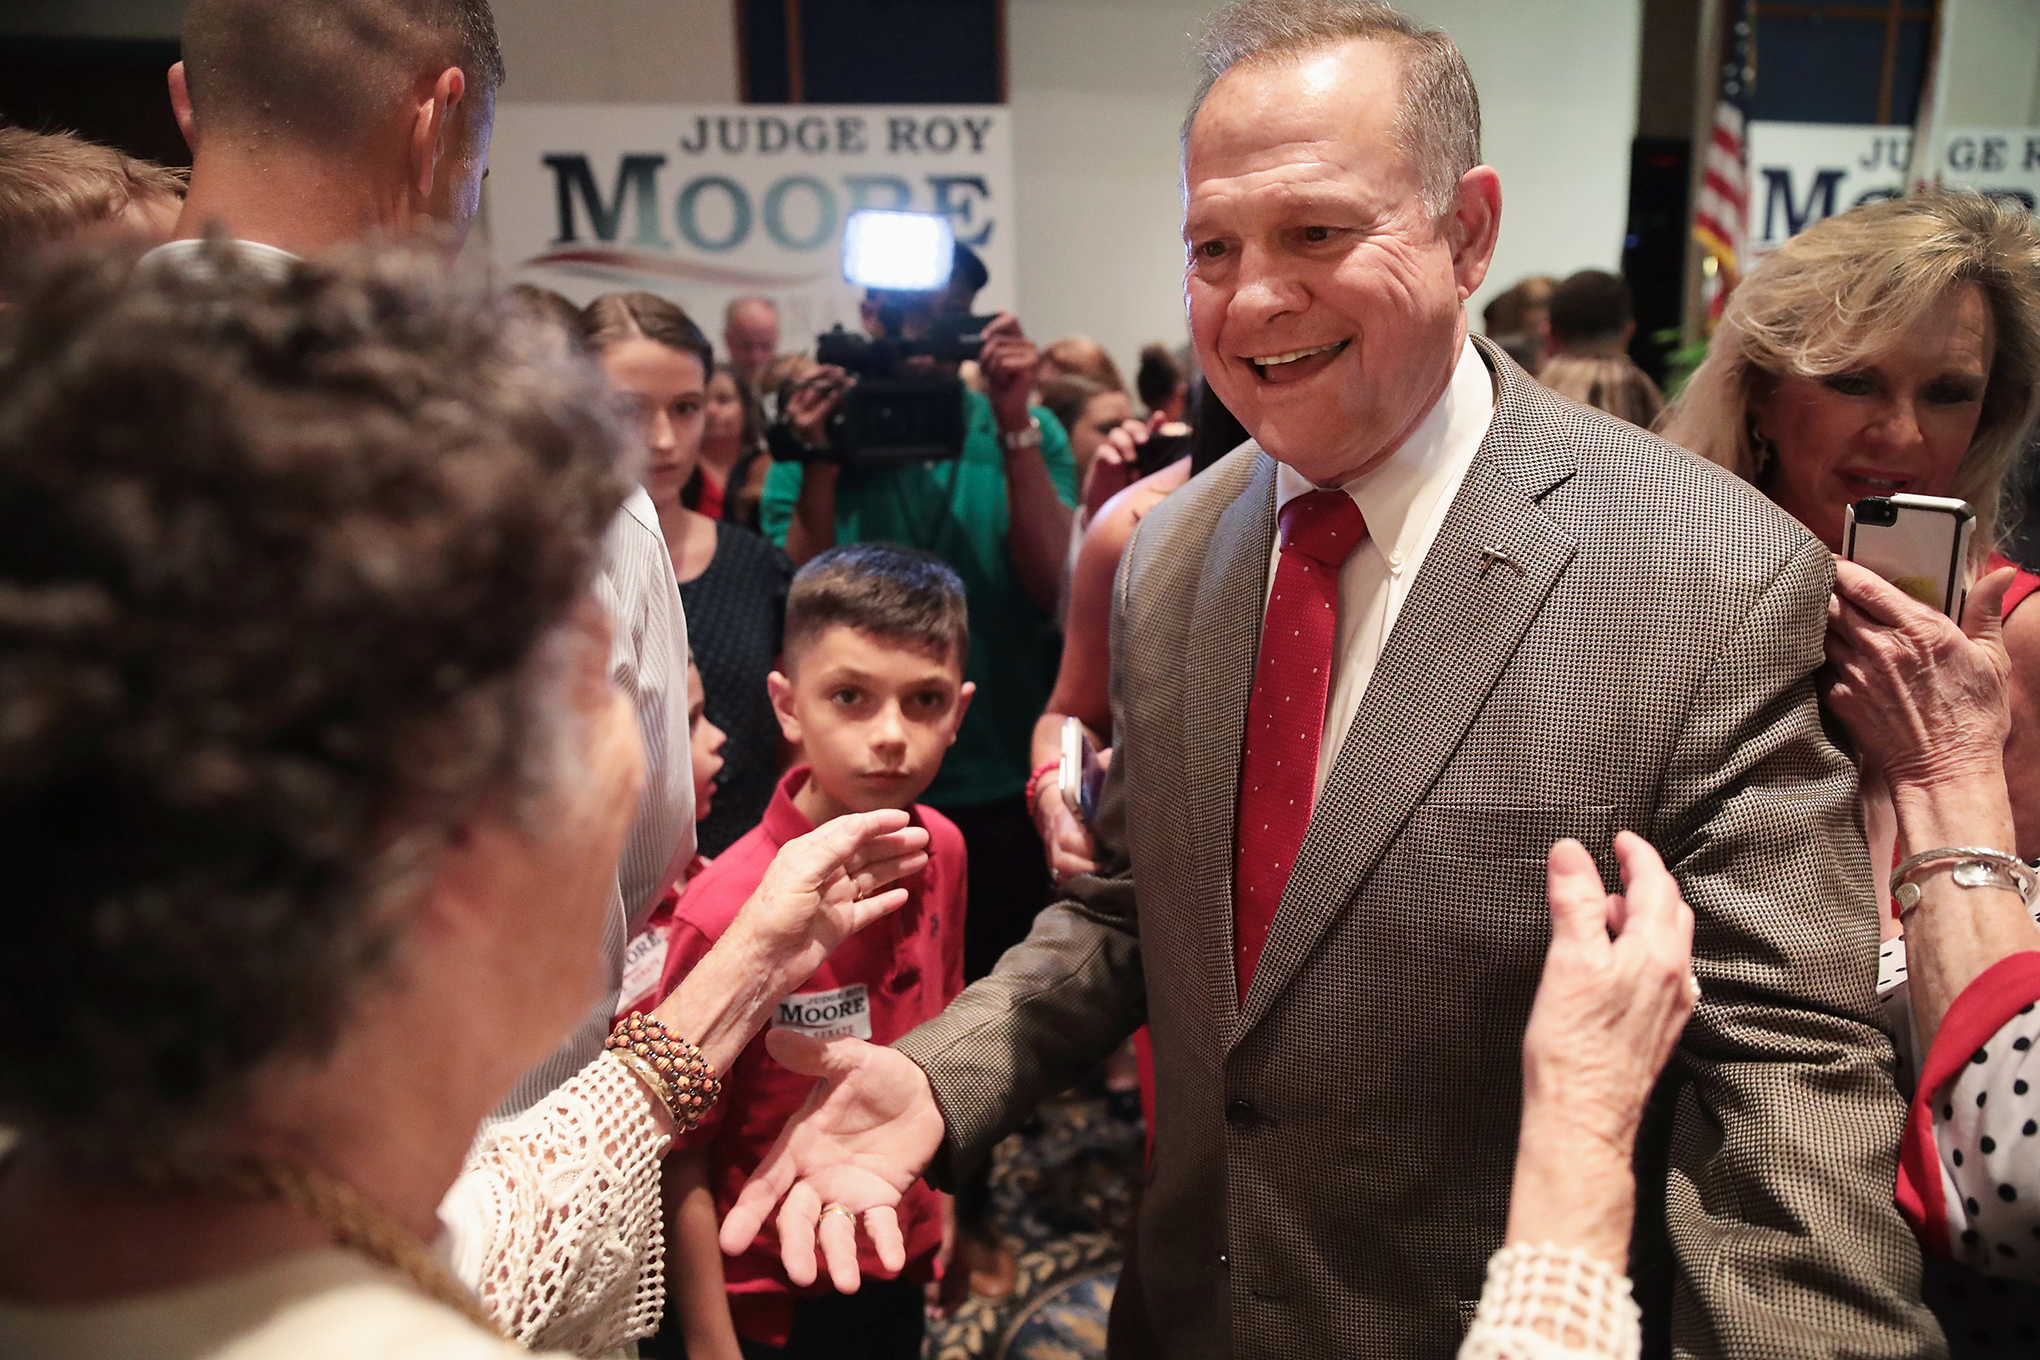 Moore greets supporters on Sept. 26 after winning the Republican primary in the special election for Alabama’s open Senate seat